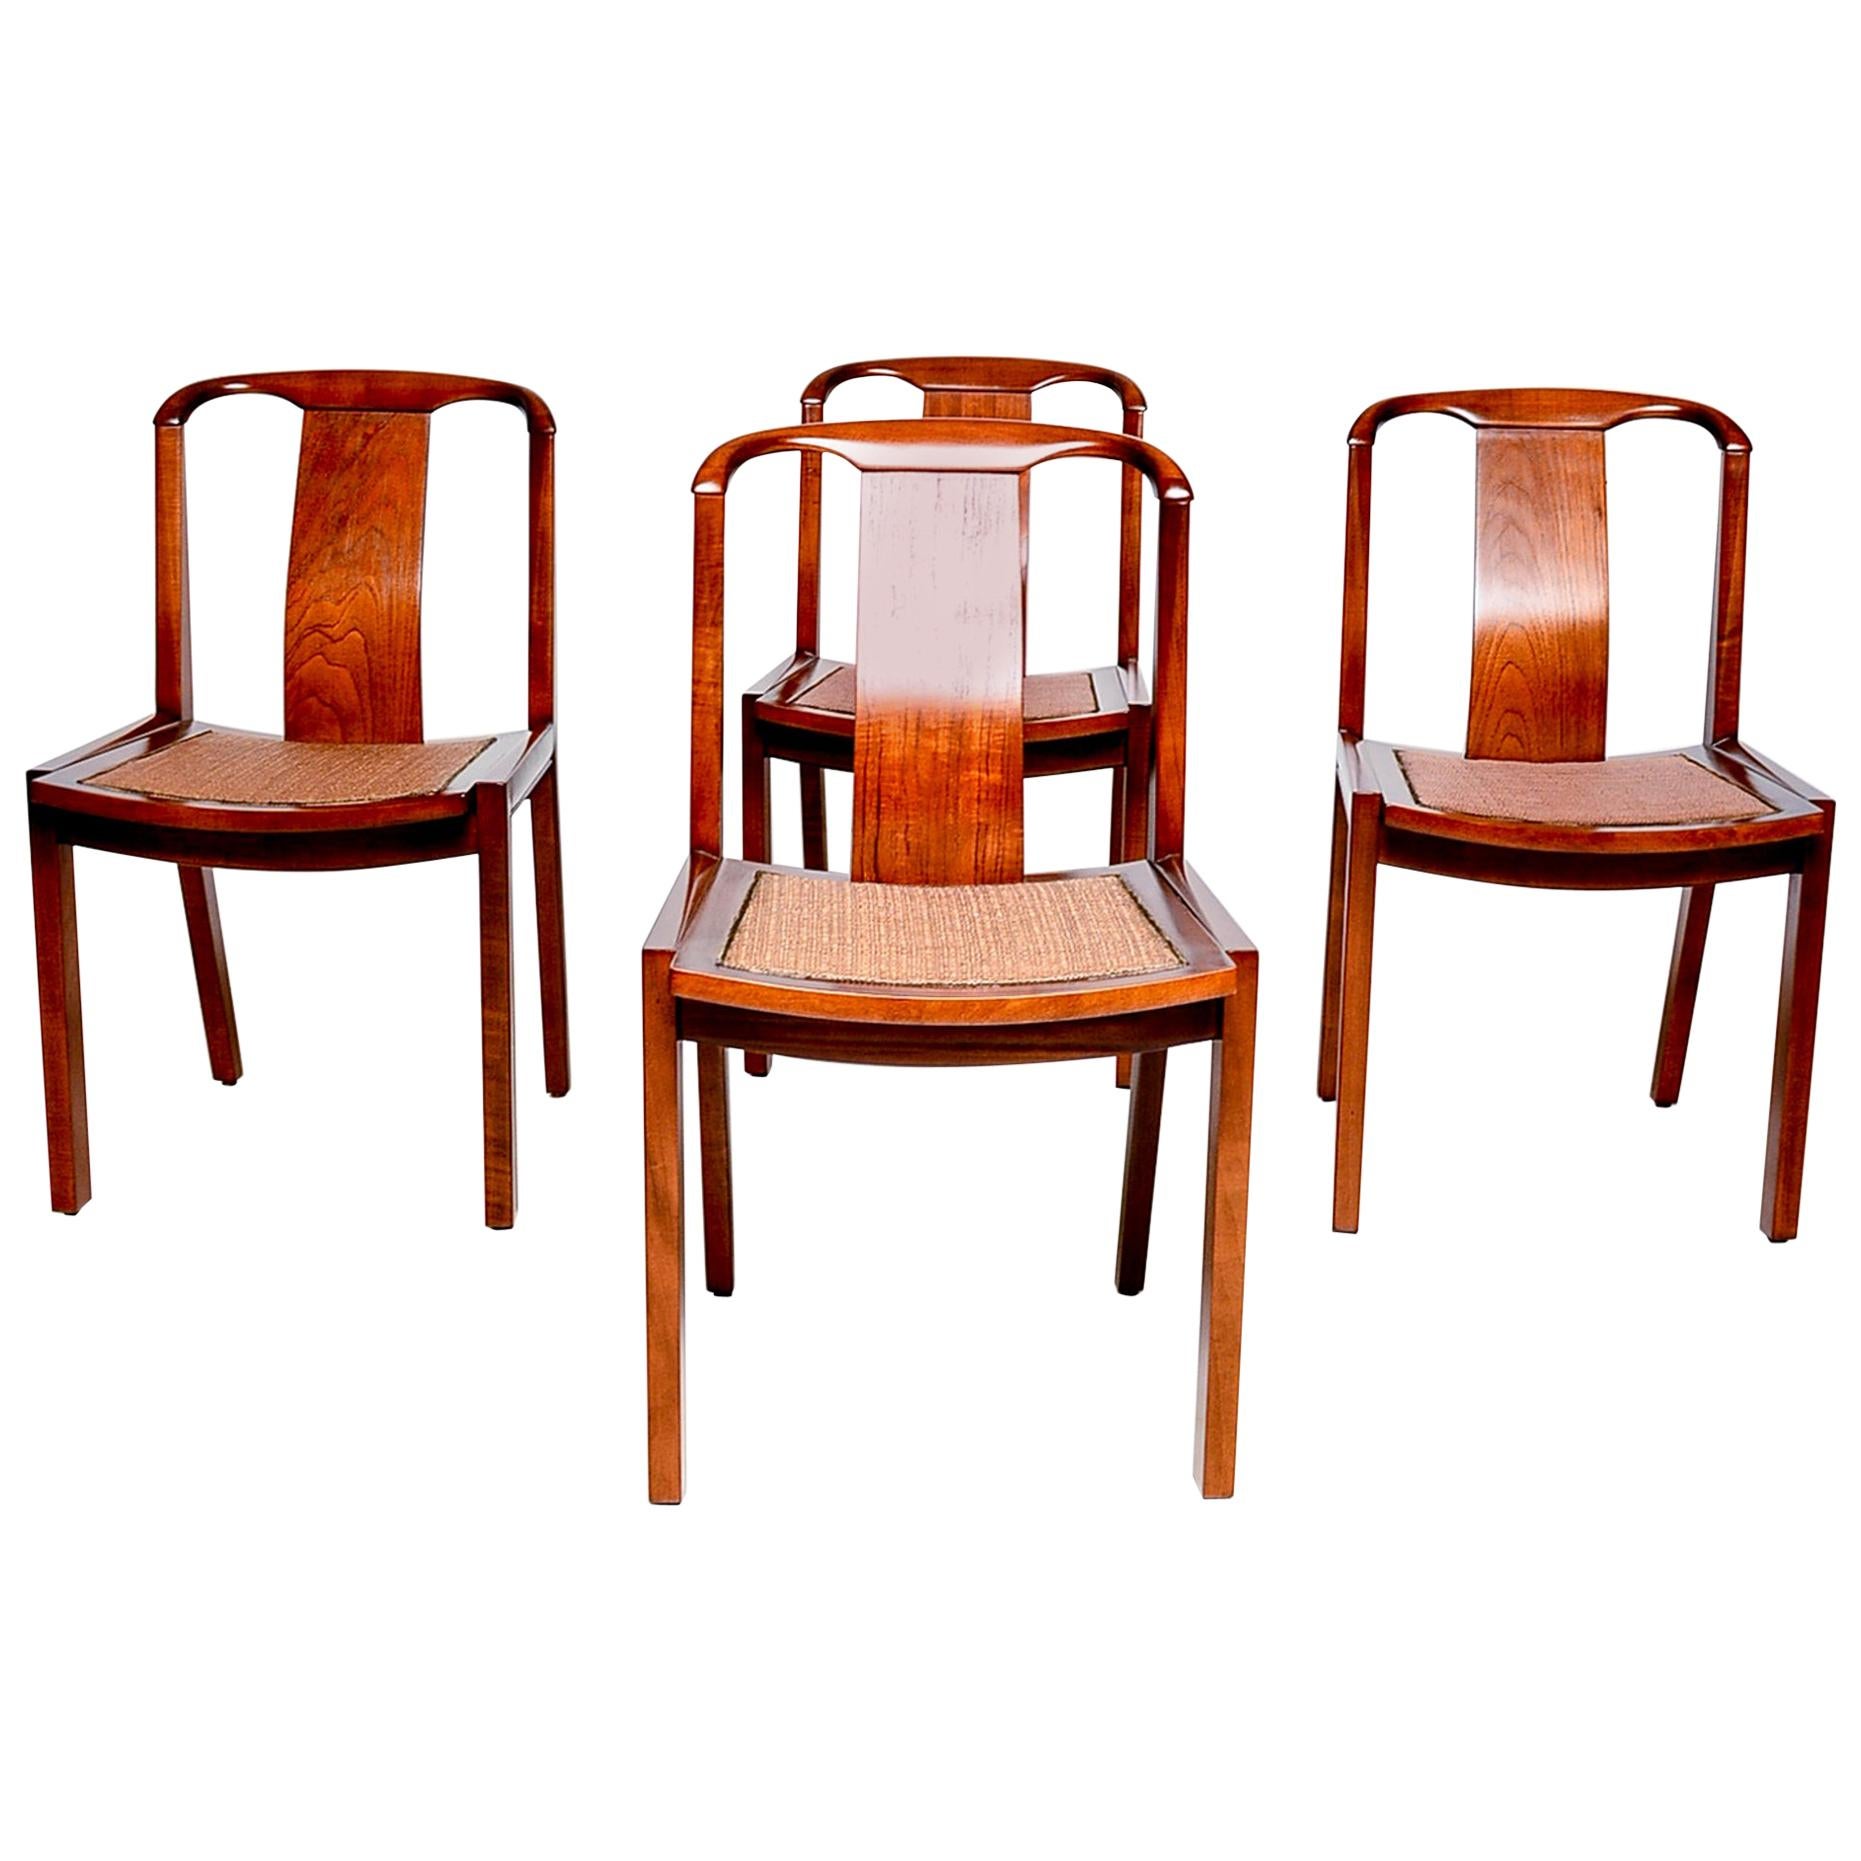 Sophisticated Baker Sculptural Walnut Wood Dining Chairs by Michael Taylor 1950s